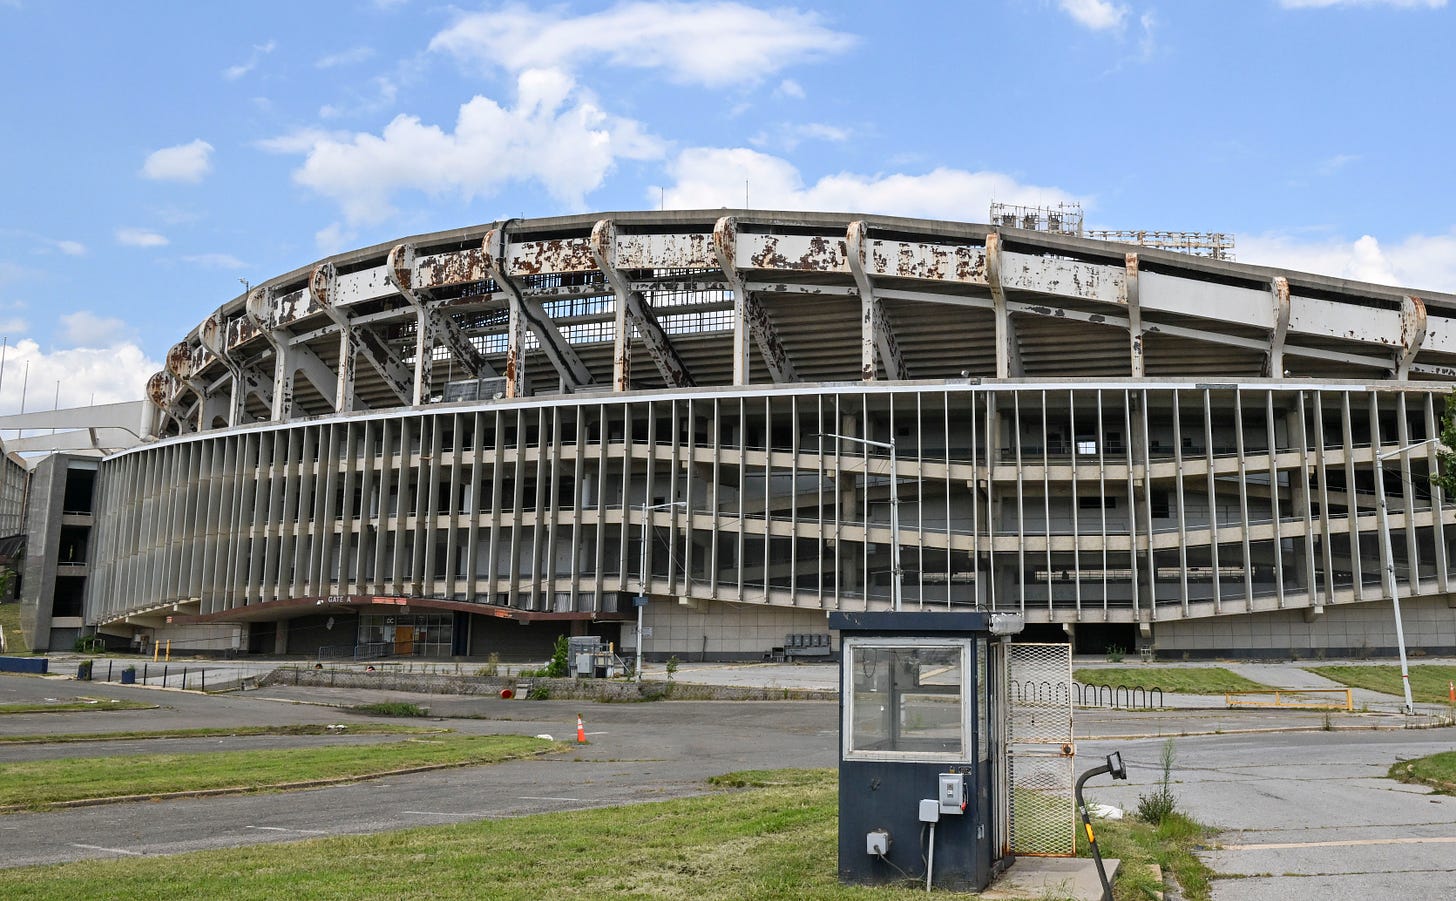 House Oversight Committee advances bill to extend D.C.'s lease of RFK site  - The Washington Post